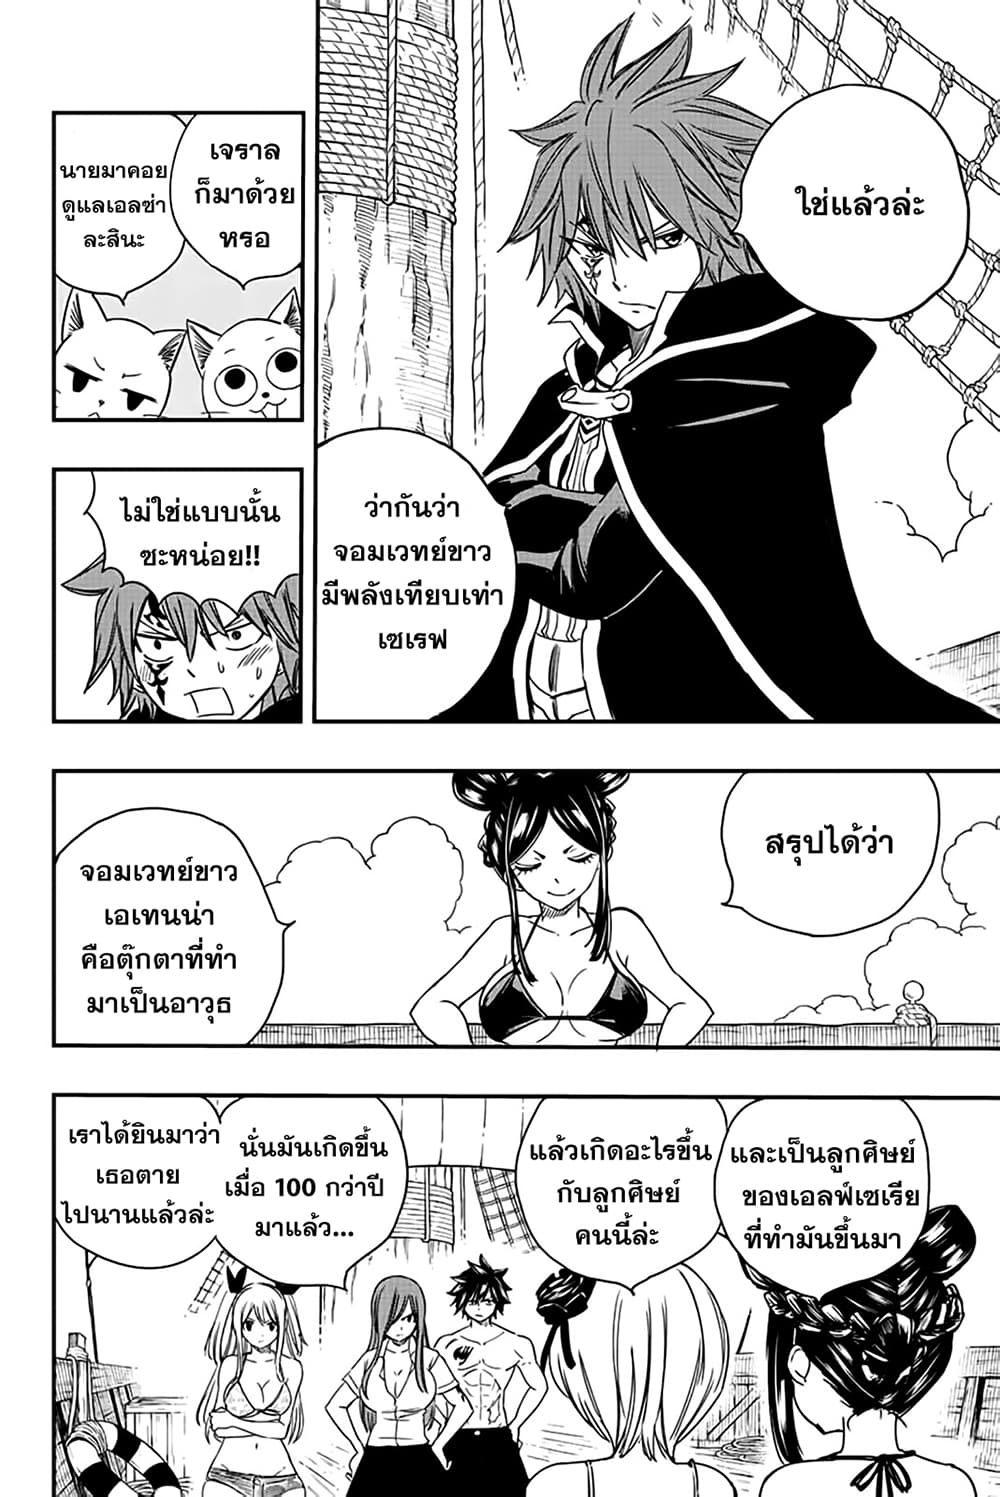 Fairy Tail 100 Years Quest à¸à¸­à¸à¸à¸µà¹ 126 (4)